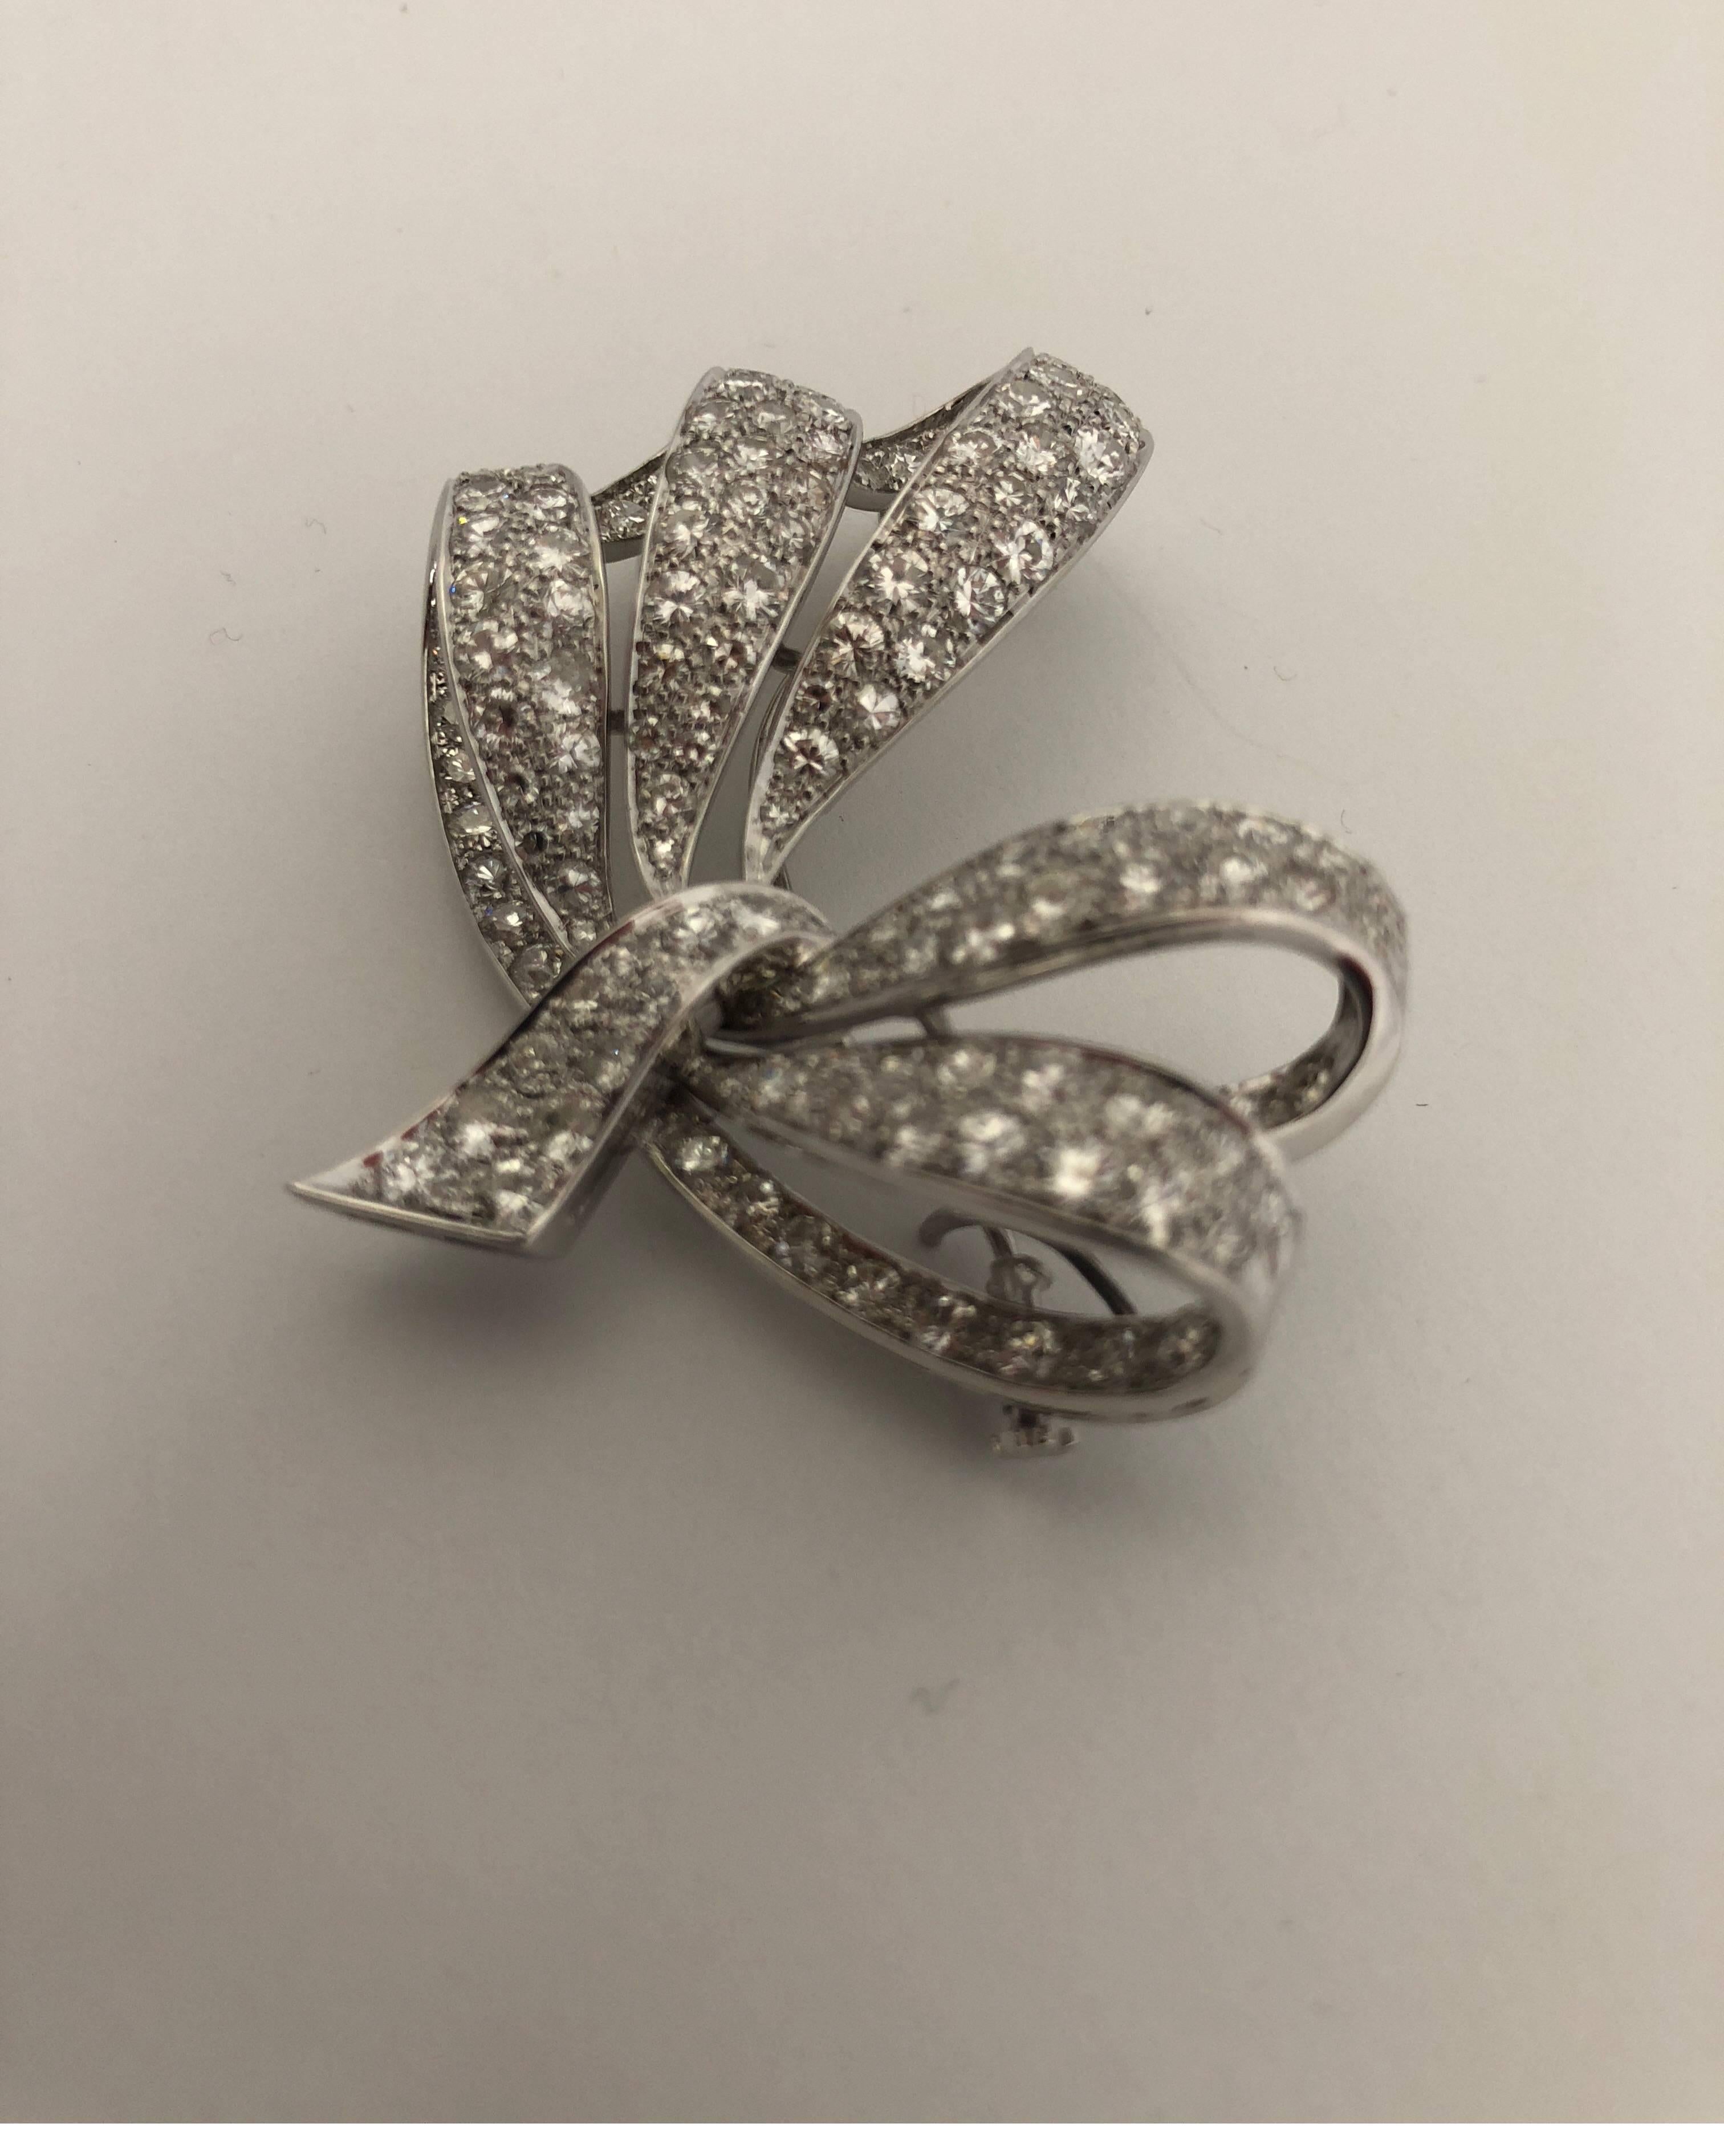 White 18kt bow brooch with white diamonds 
Can be worn as a pendent if used on a chain
Total weight of gold gr 19
total weight of diamonds ct 5.50
